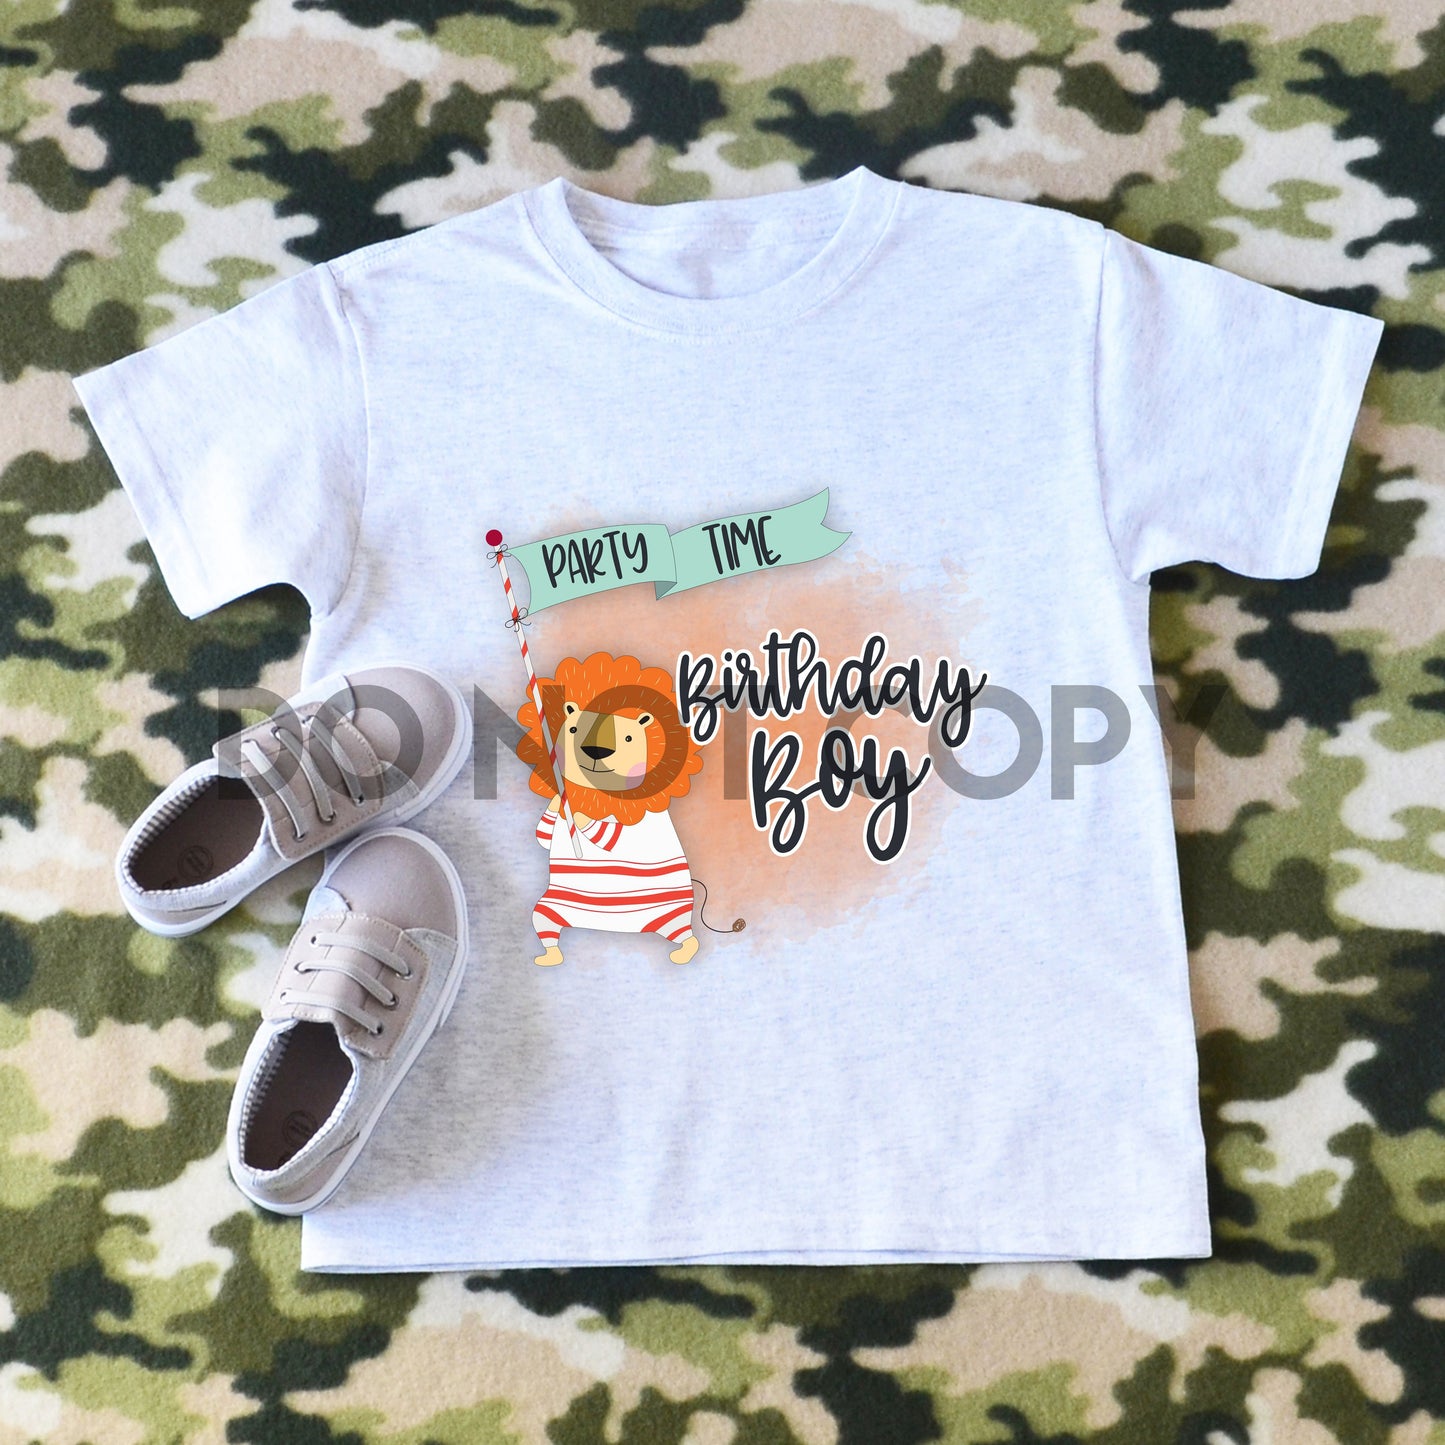 Party Time Birthday Boy Lion Sublimation print